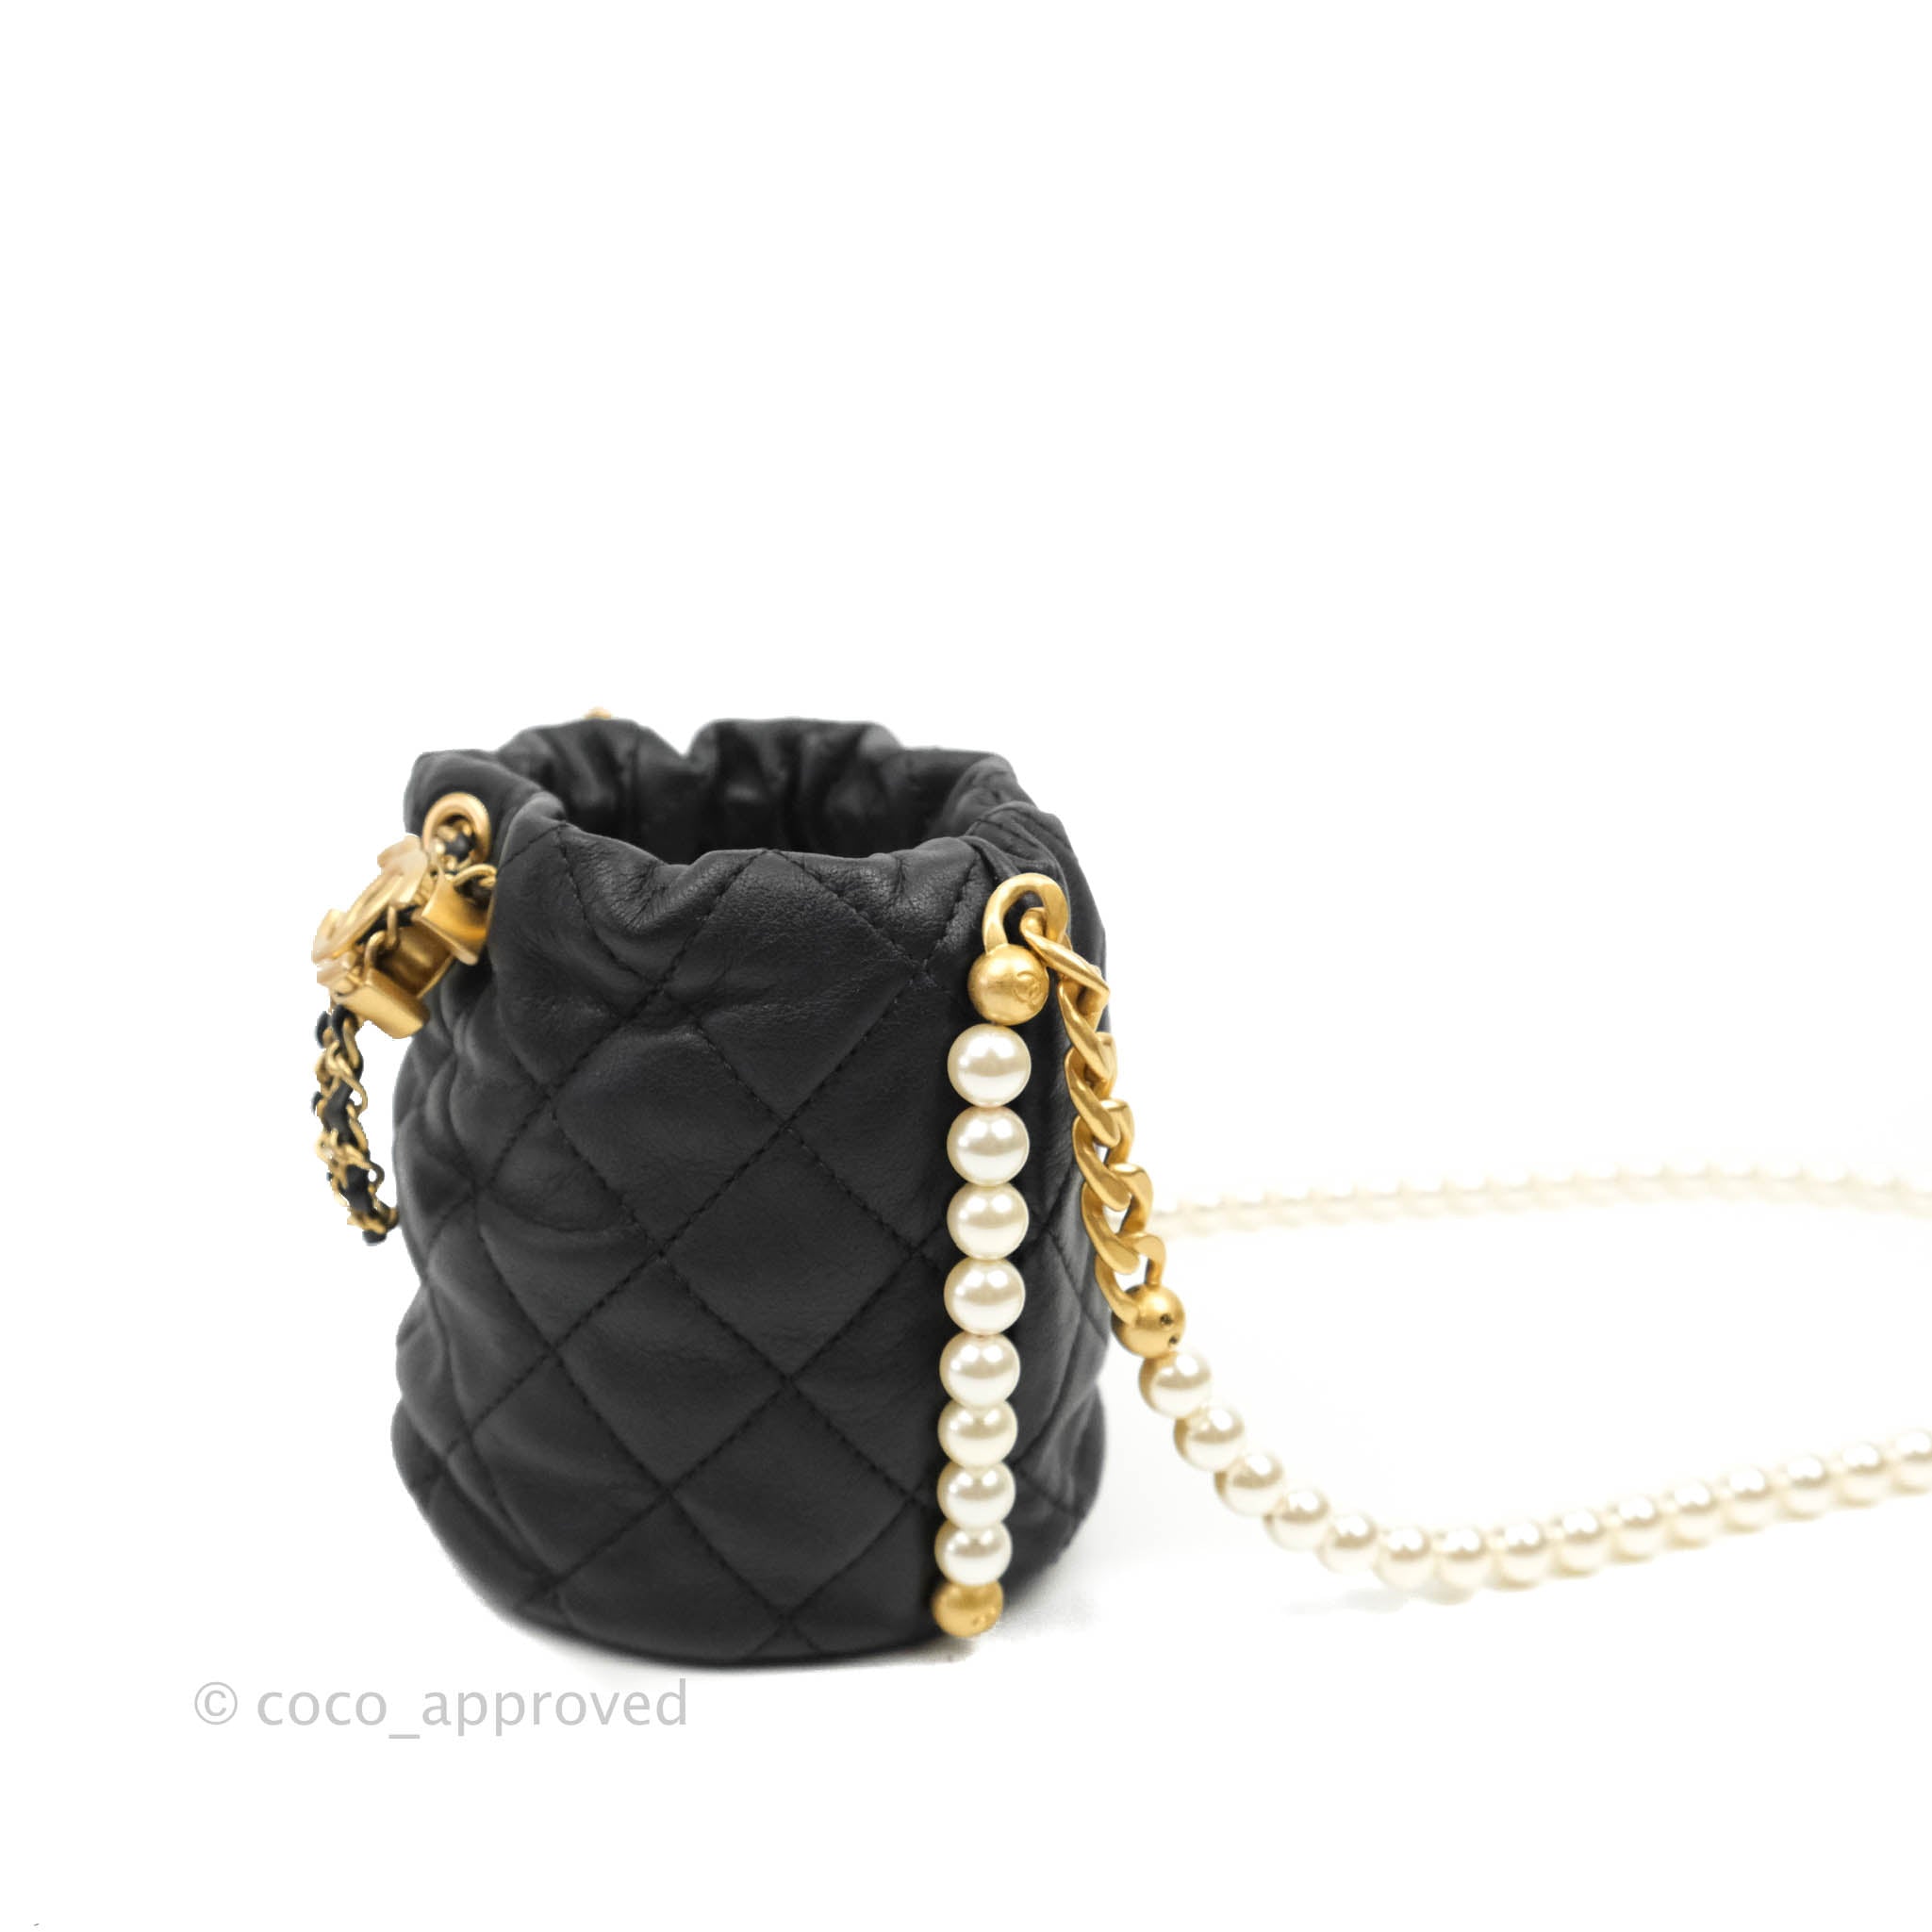 Chanel Mini Bucket - 21 For Sale on 1stDibs  chanel mini bucket bag, mini  chanel bucket bag, chanel mini bucket with chain